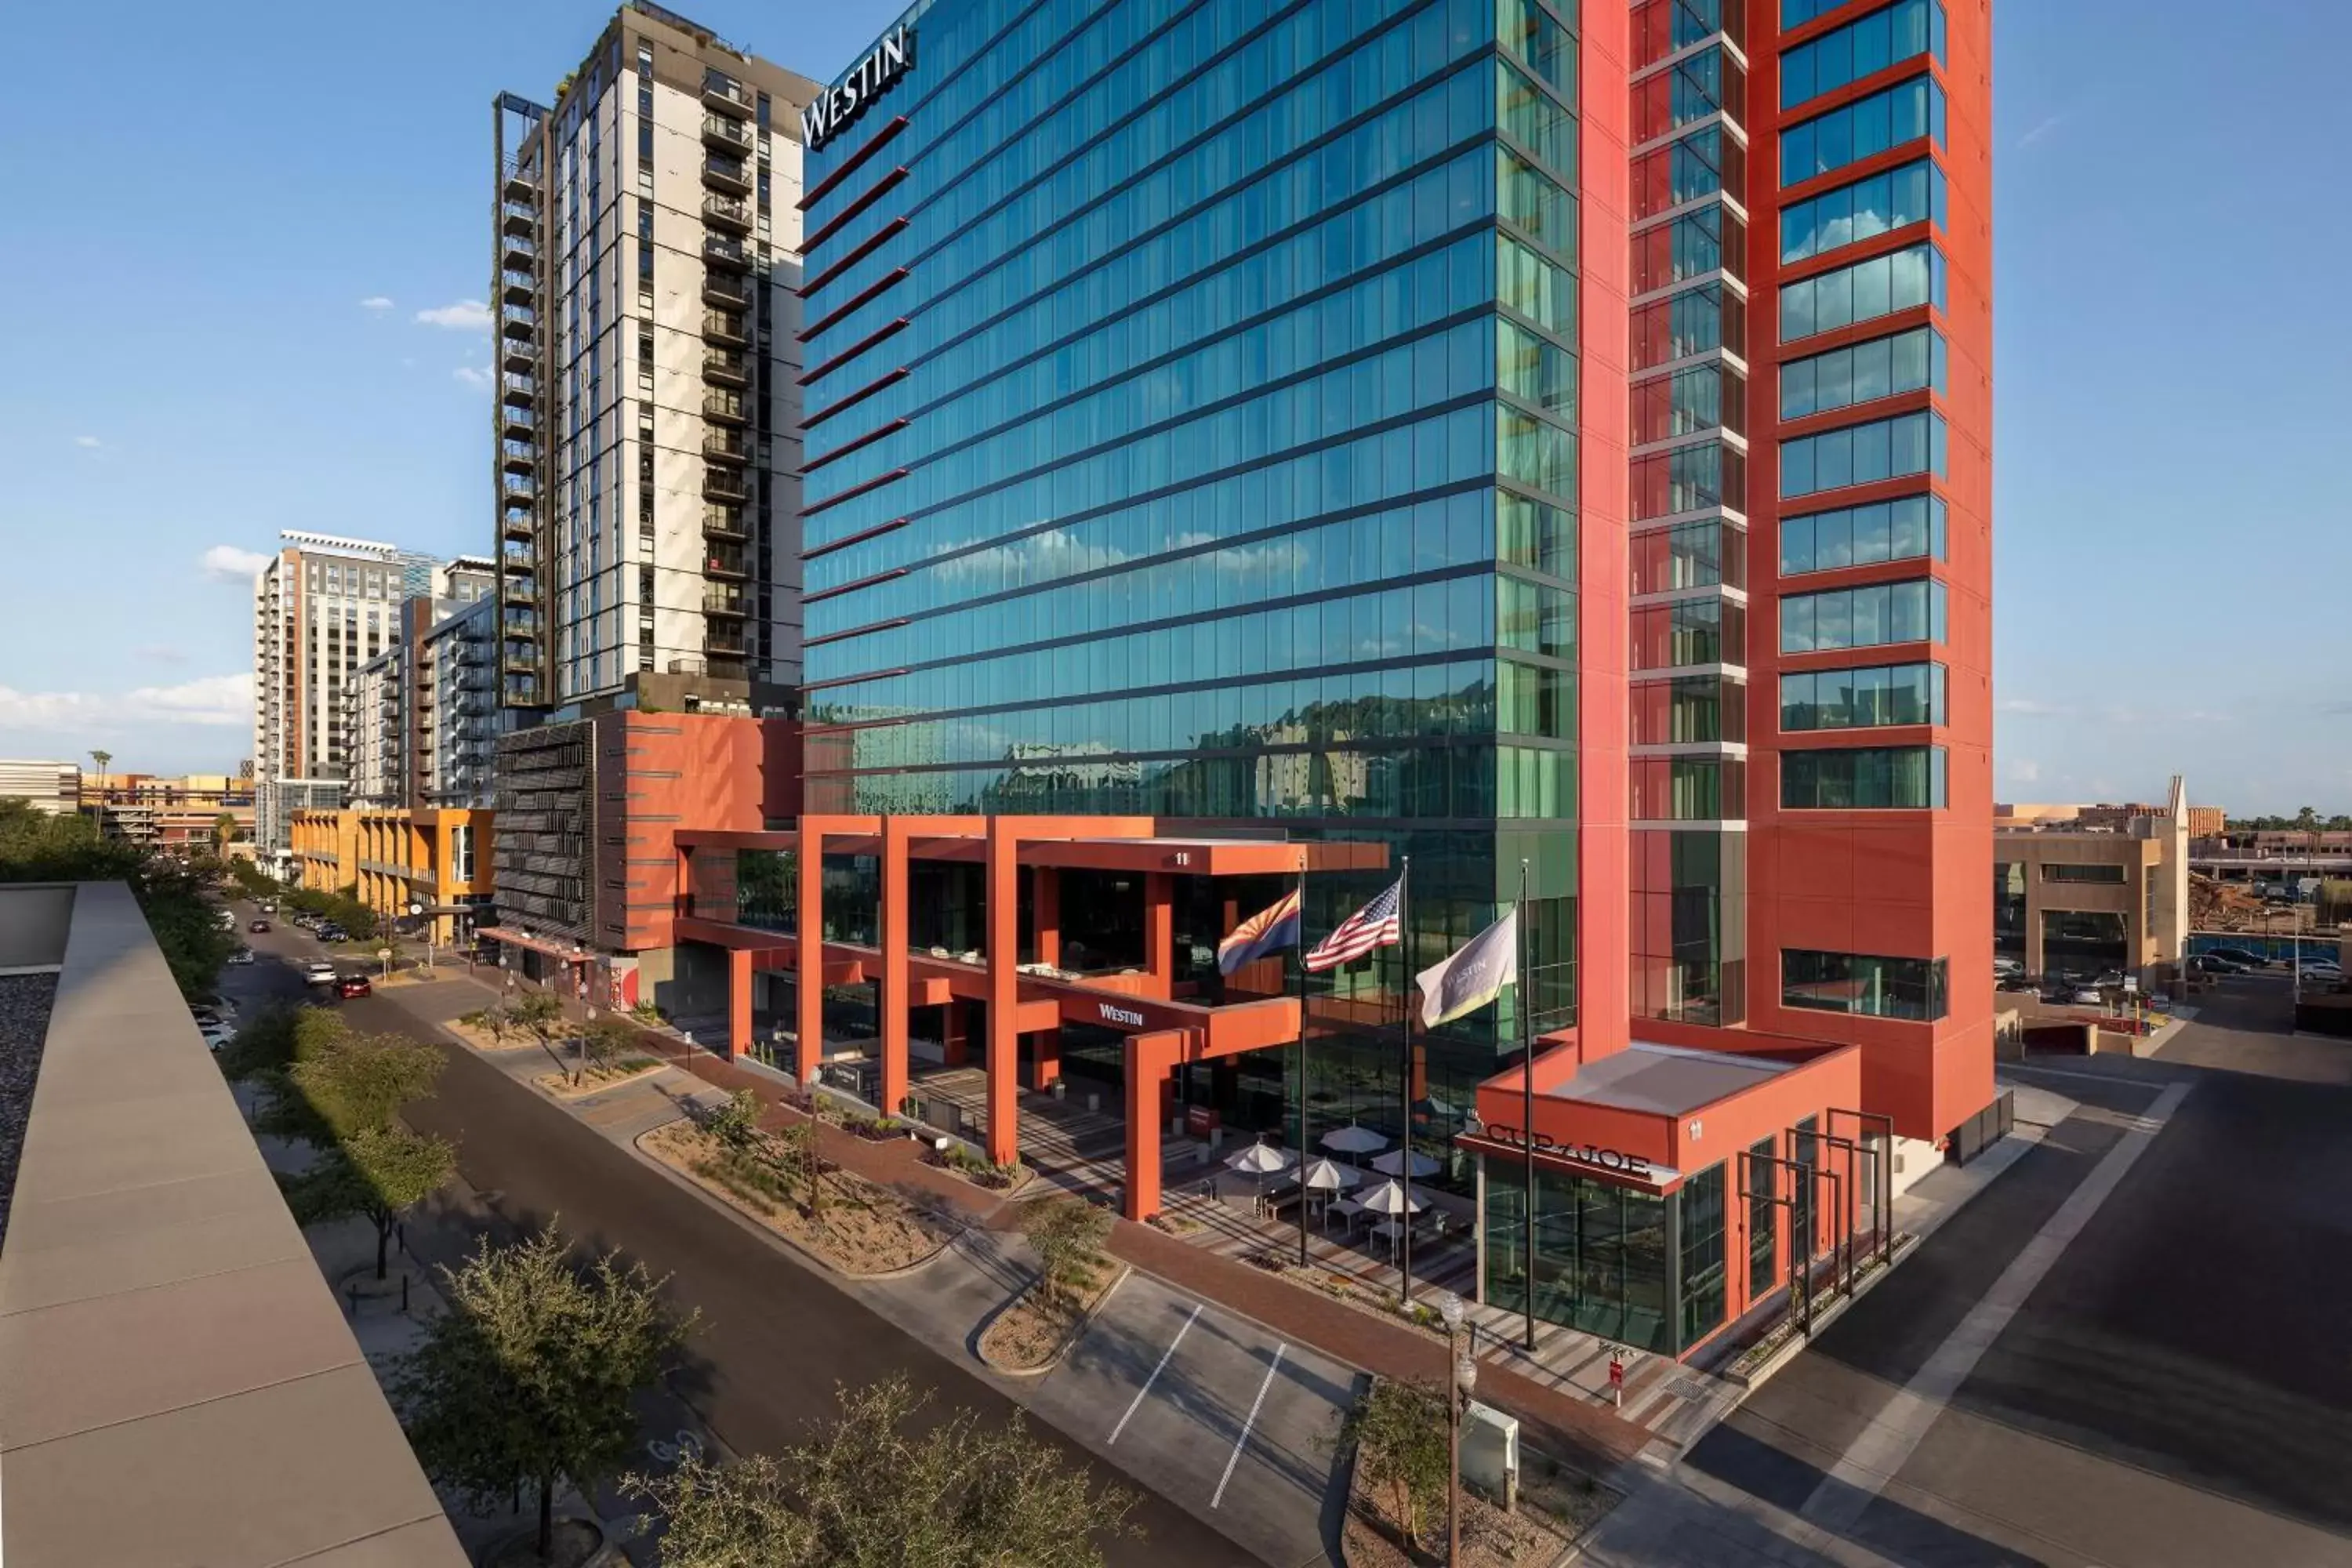 Property building in The Westin Tempe